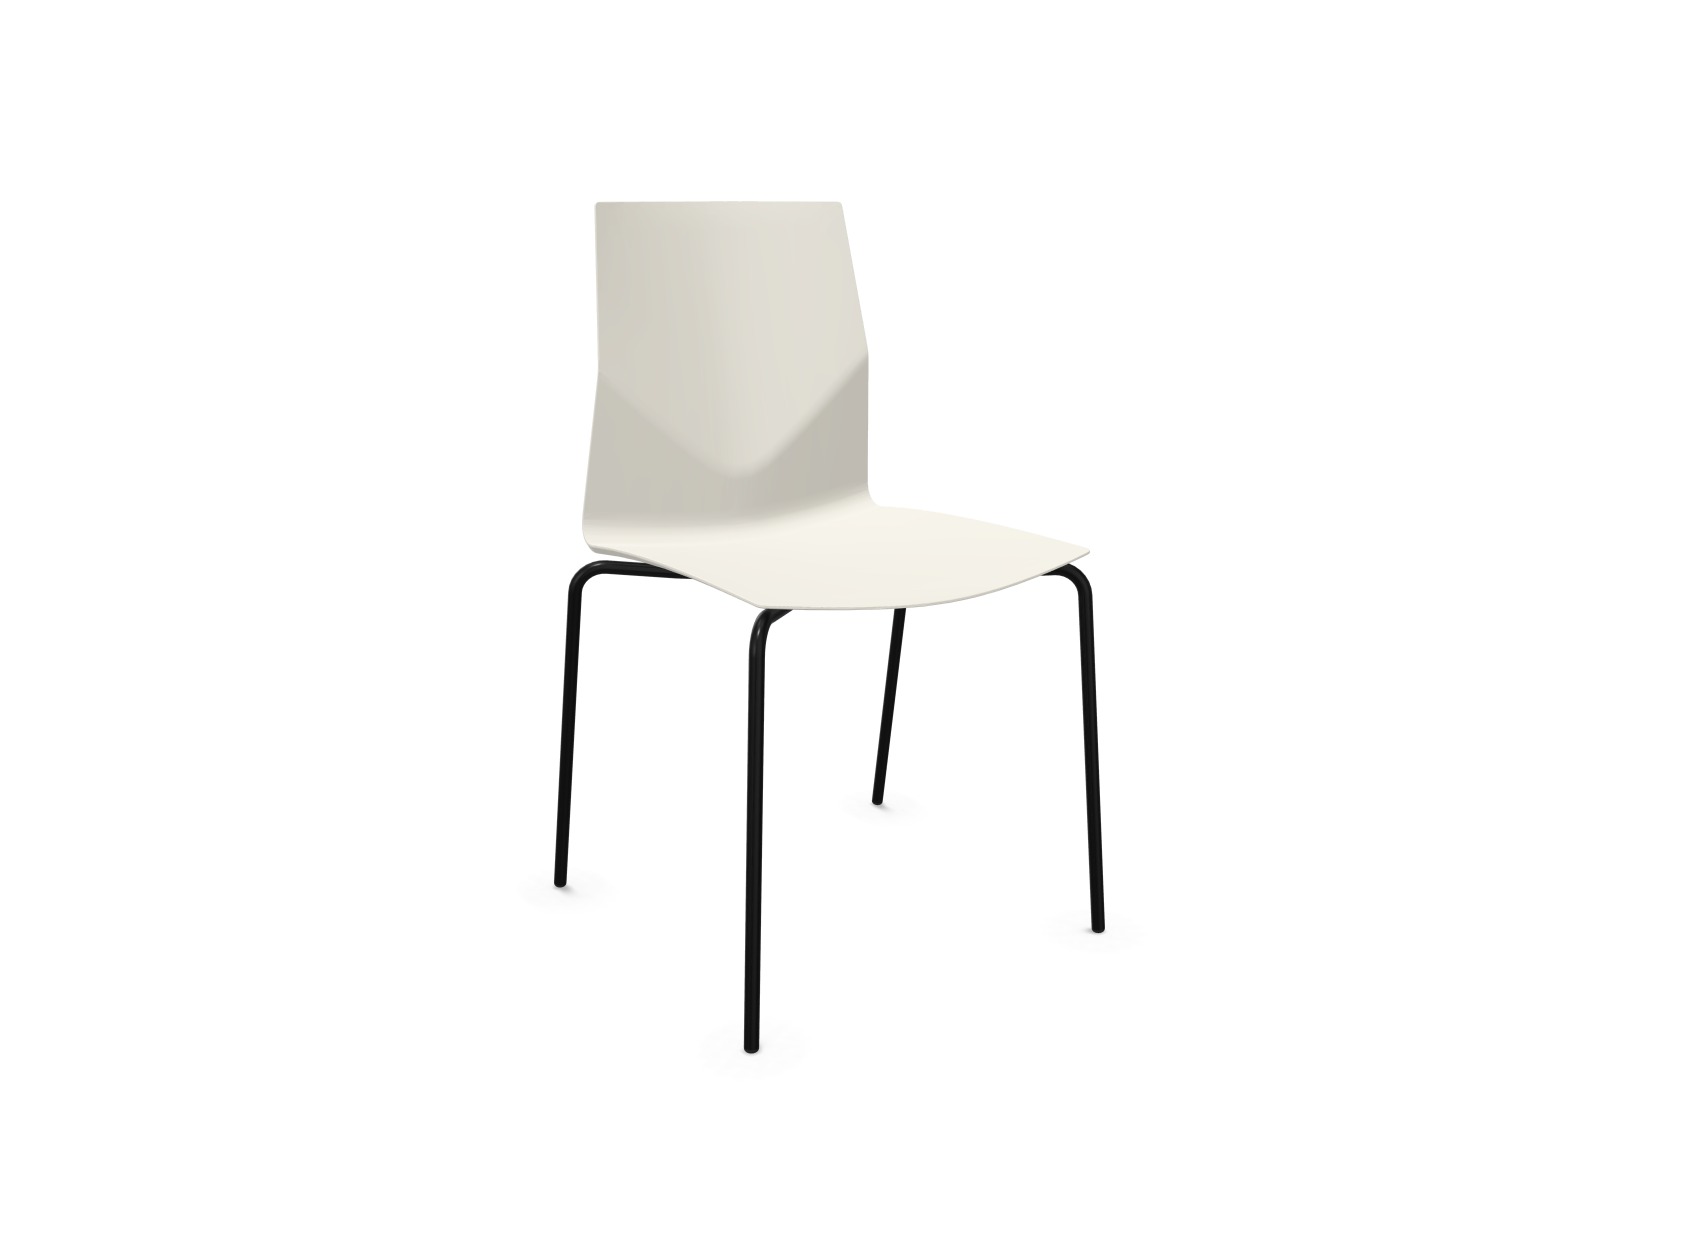 Stacking Chairs Archives - Ocee & Four Design